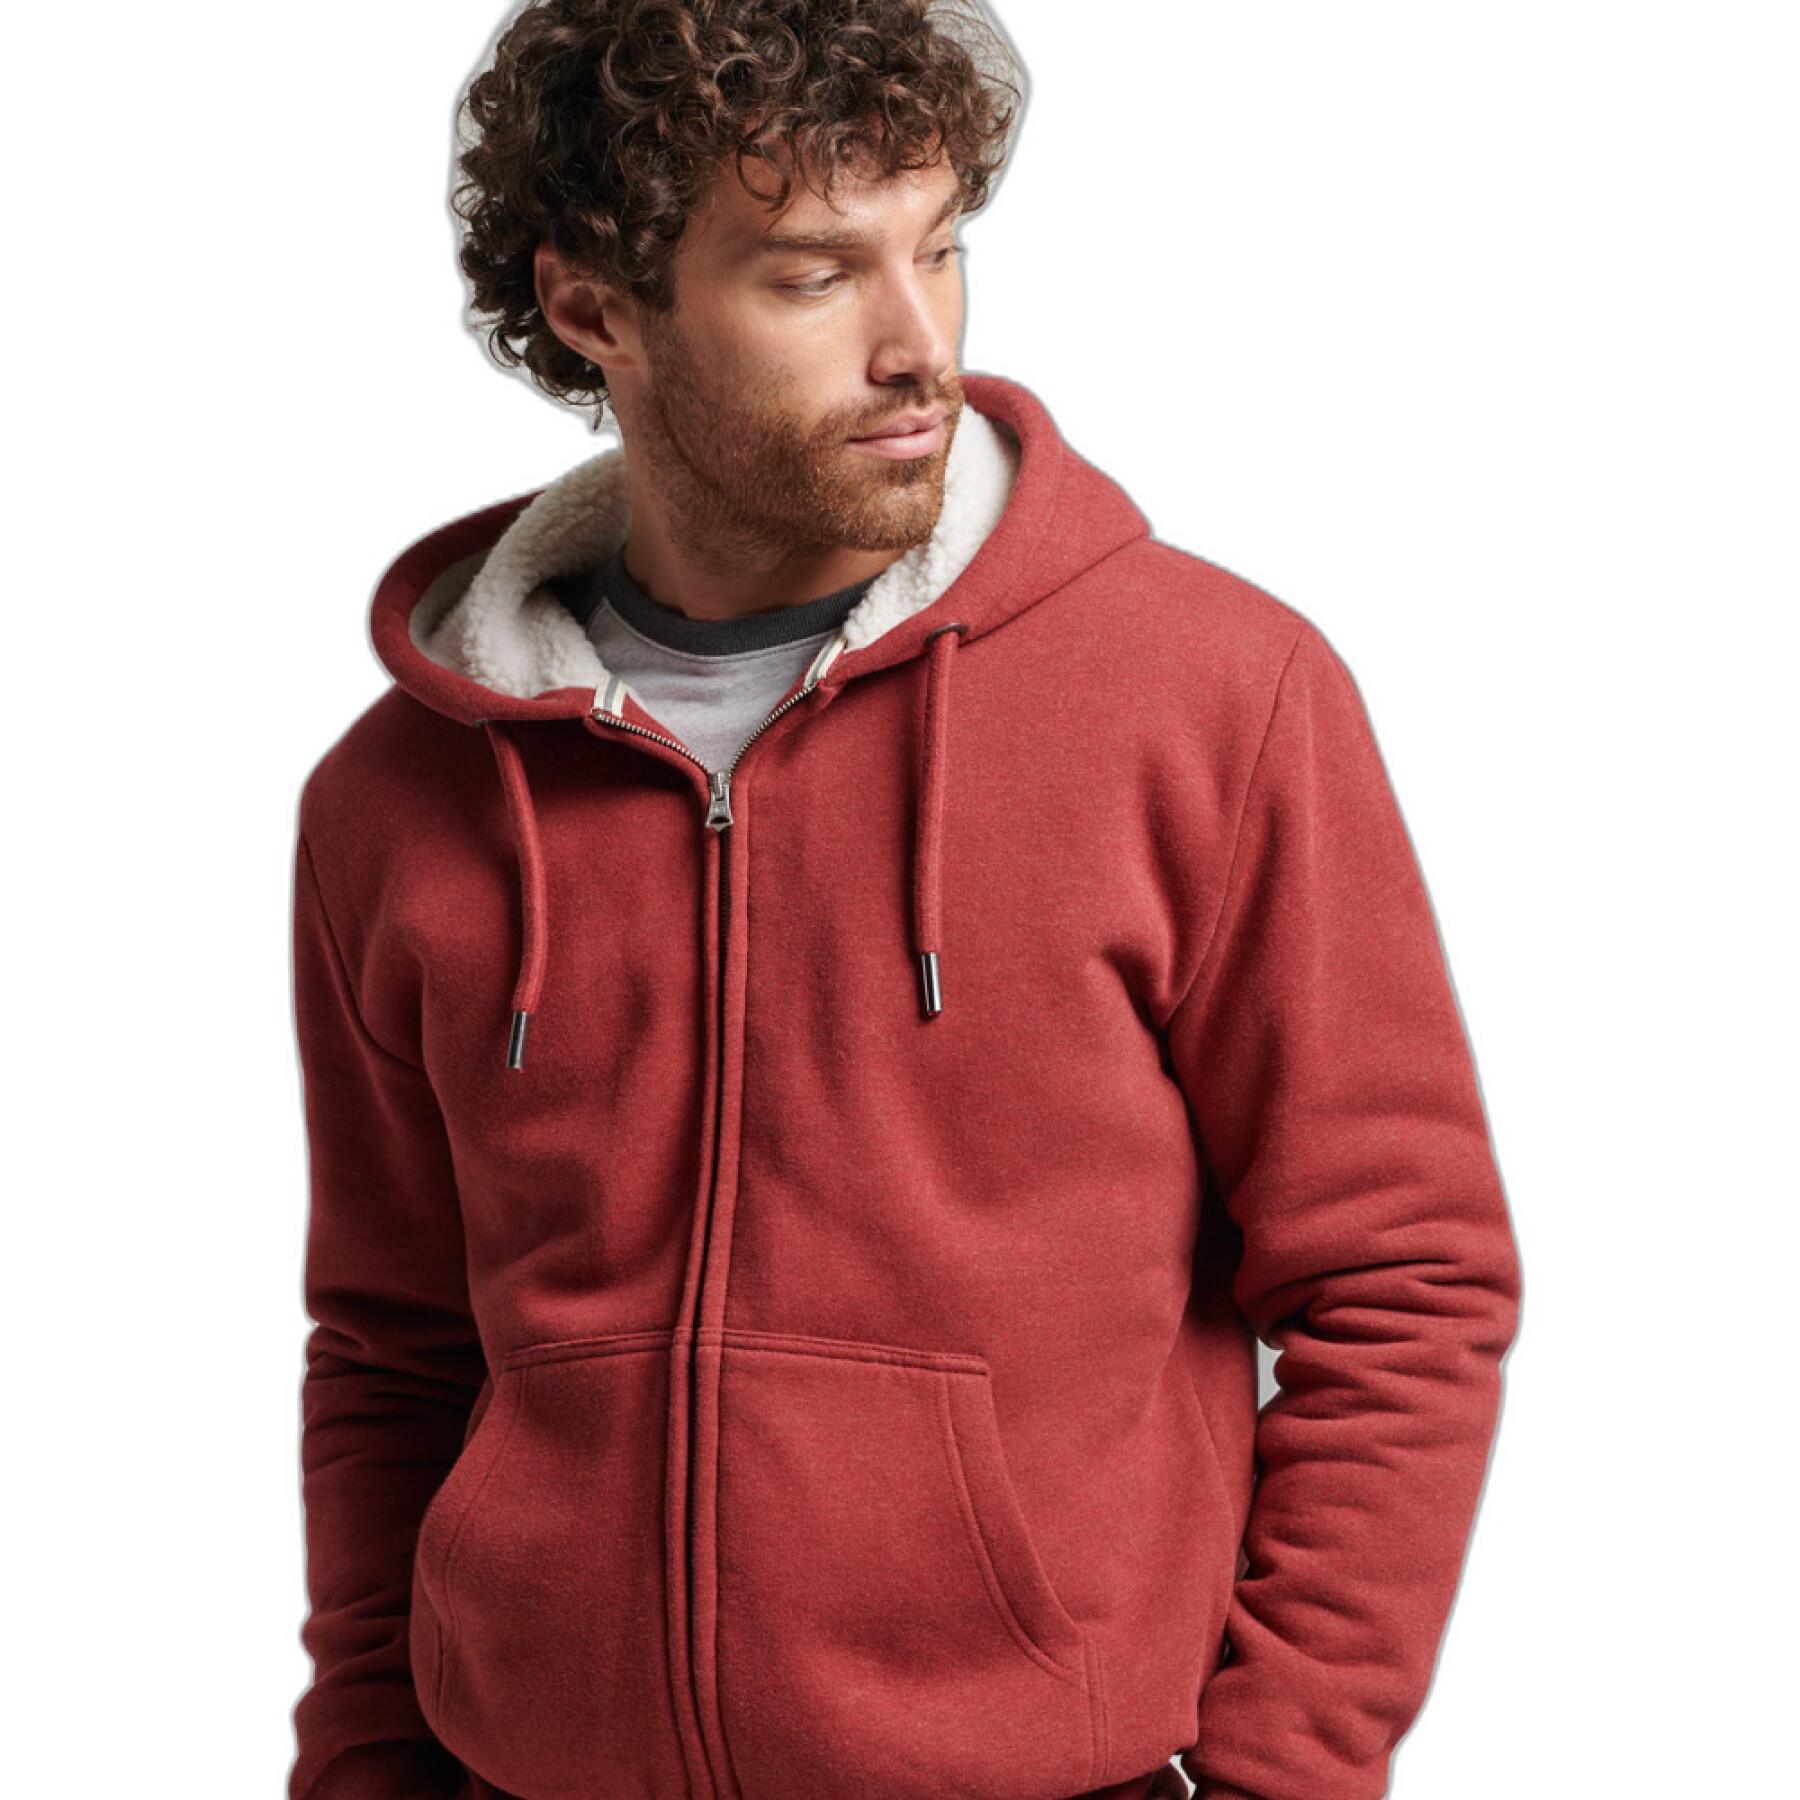 Hooded sweatshirt with zipper and wool lining Superdry